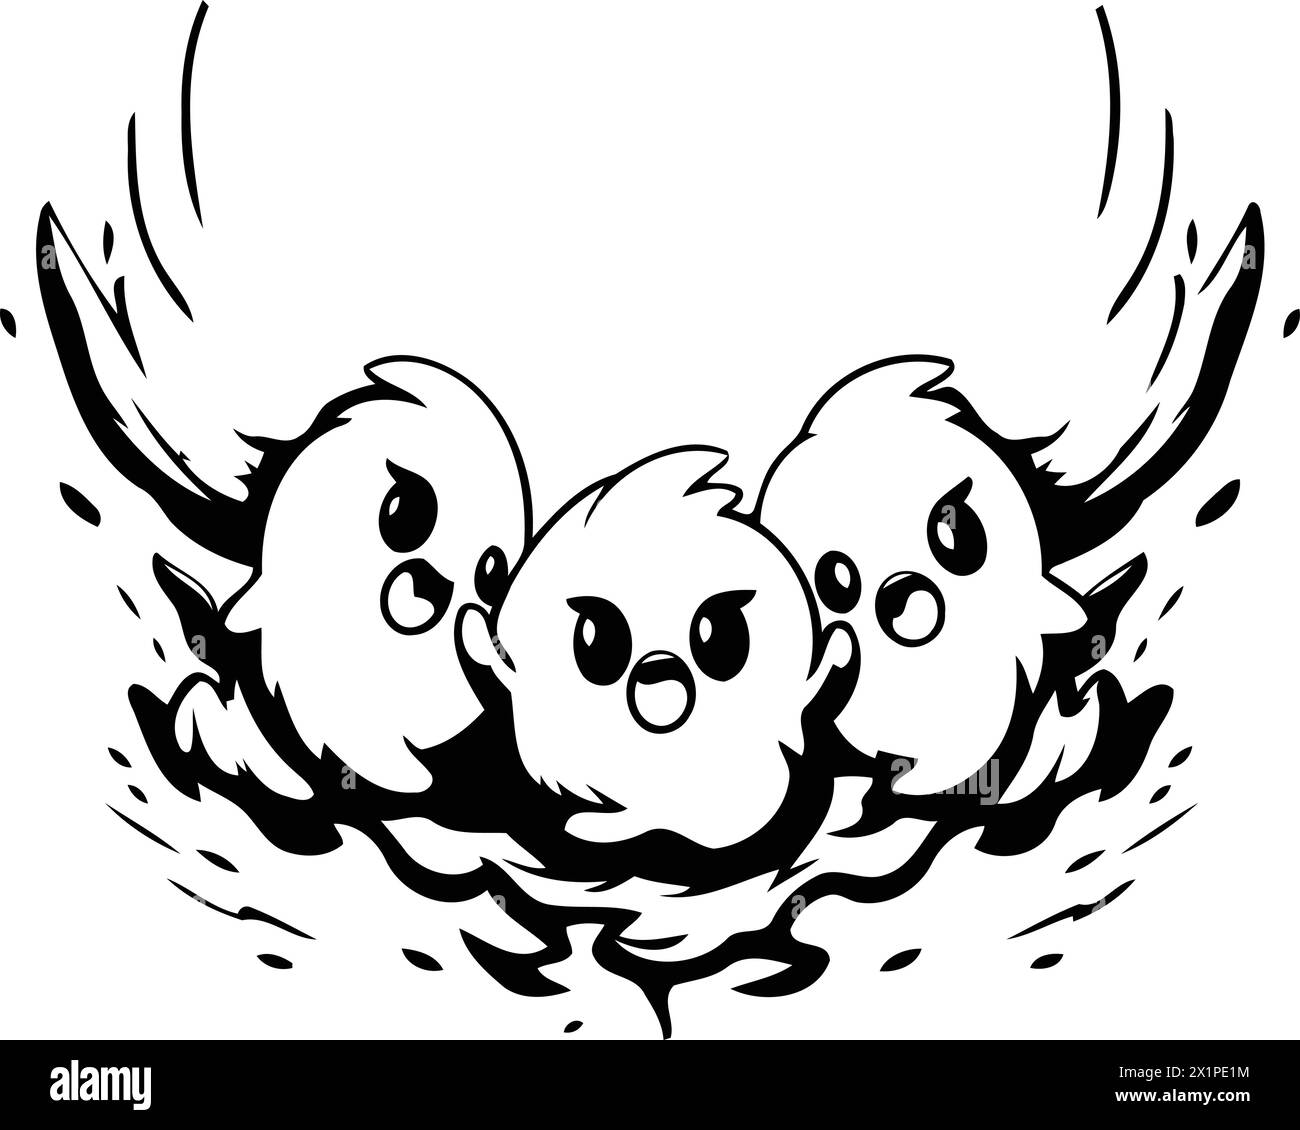 Illustration of a cute baby bird in the nest. Vector illustration. Stock Vector